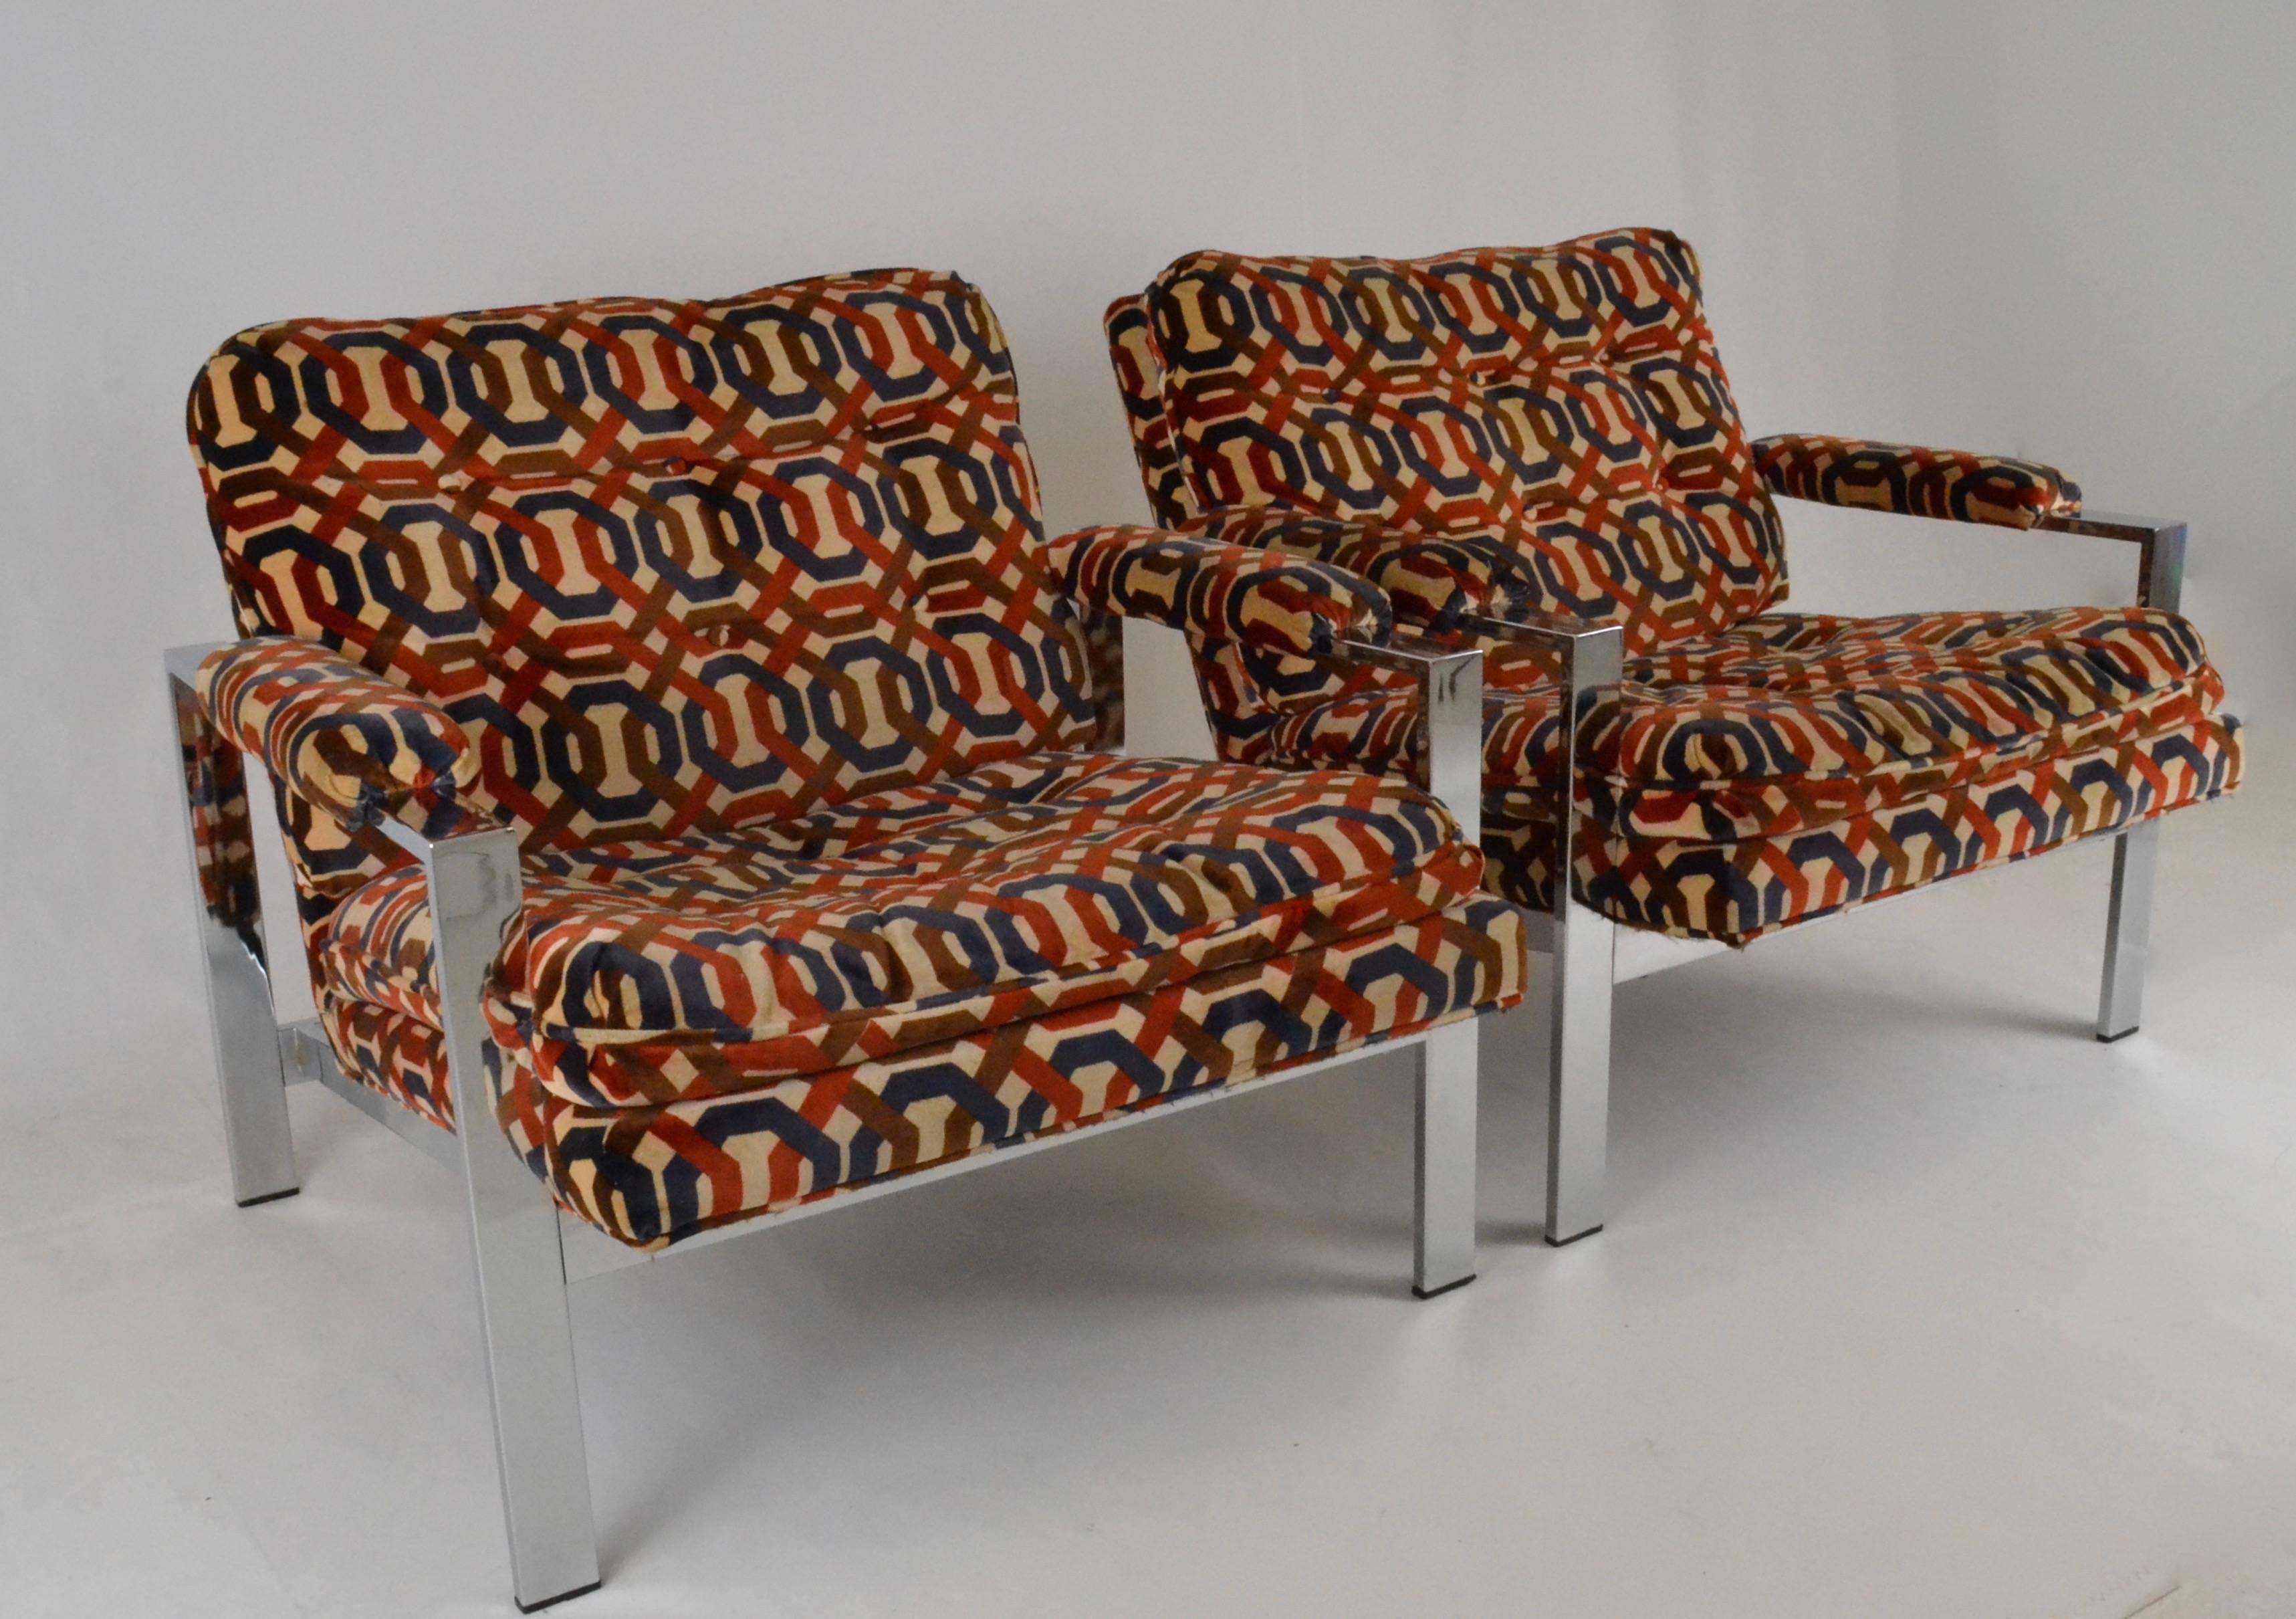 A terrific pair with original upholstery. Chrome in very good condition: Upholstery is clean but worn and should be replaced.